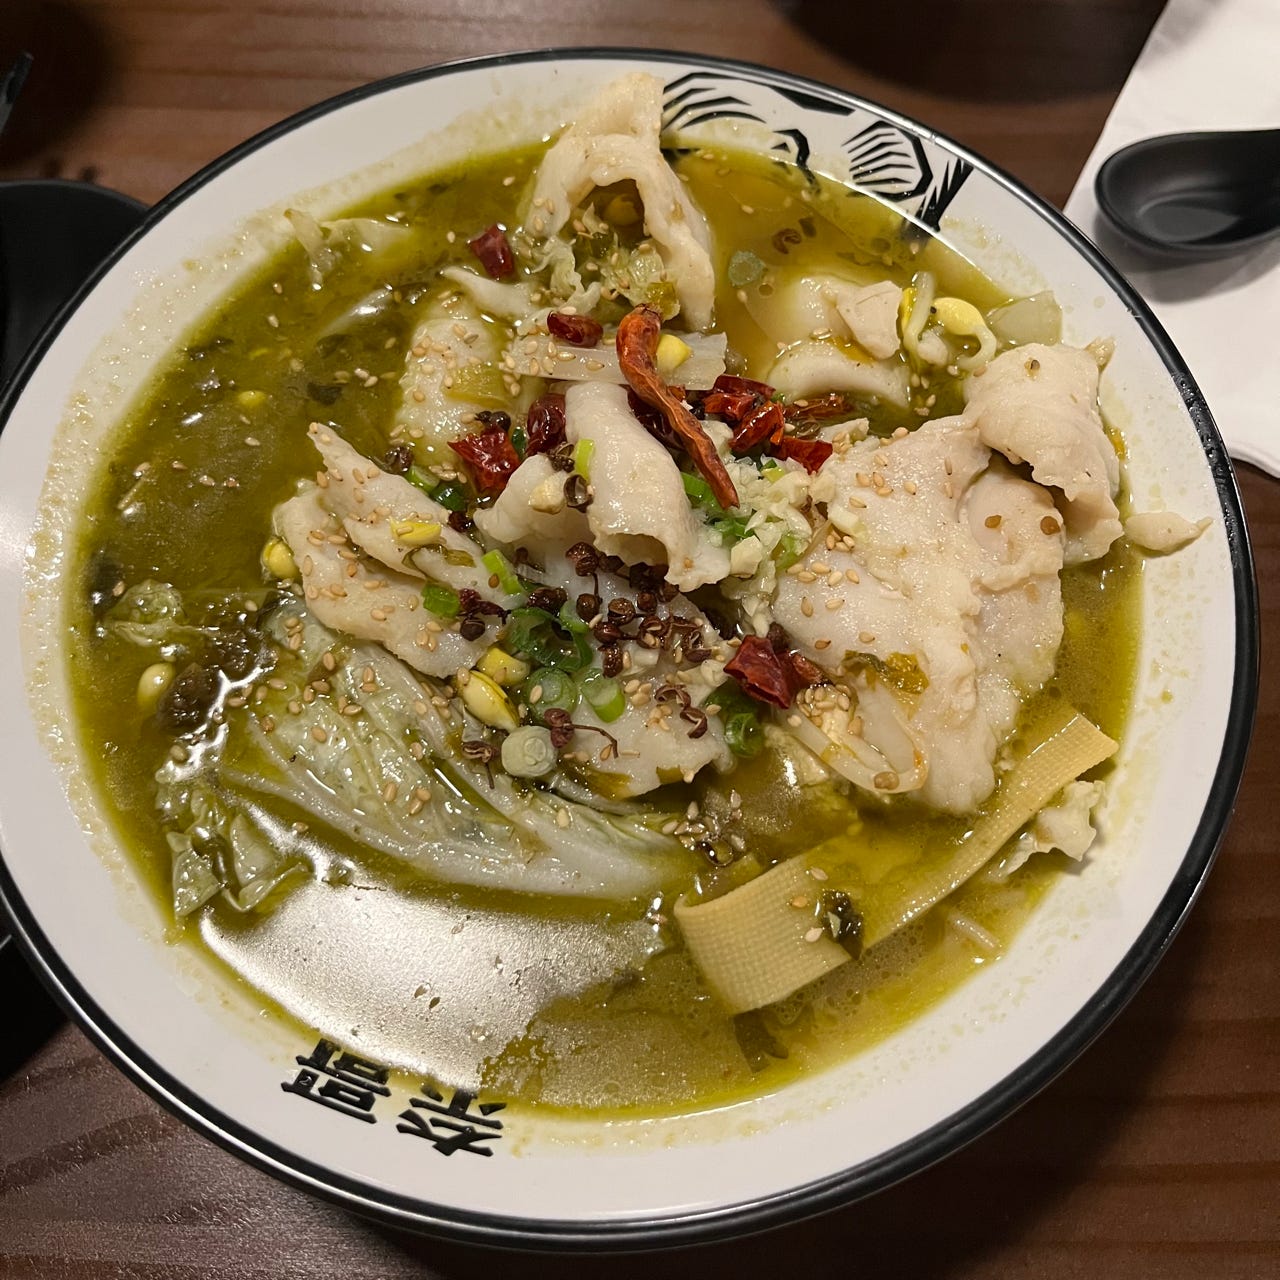 A greenish gold stew with chunks of white fish, cabbage, and peppercorns.